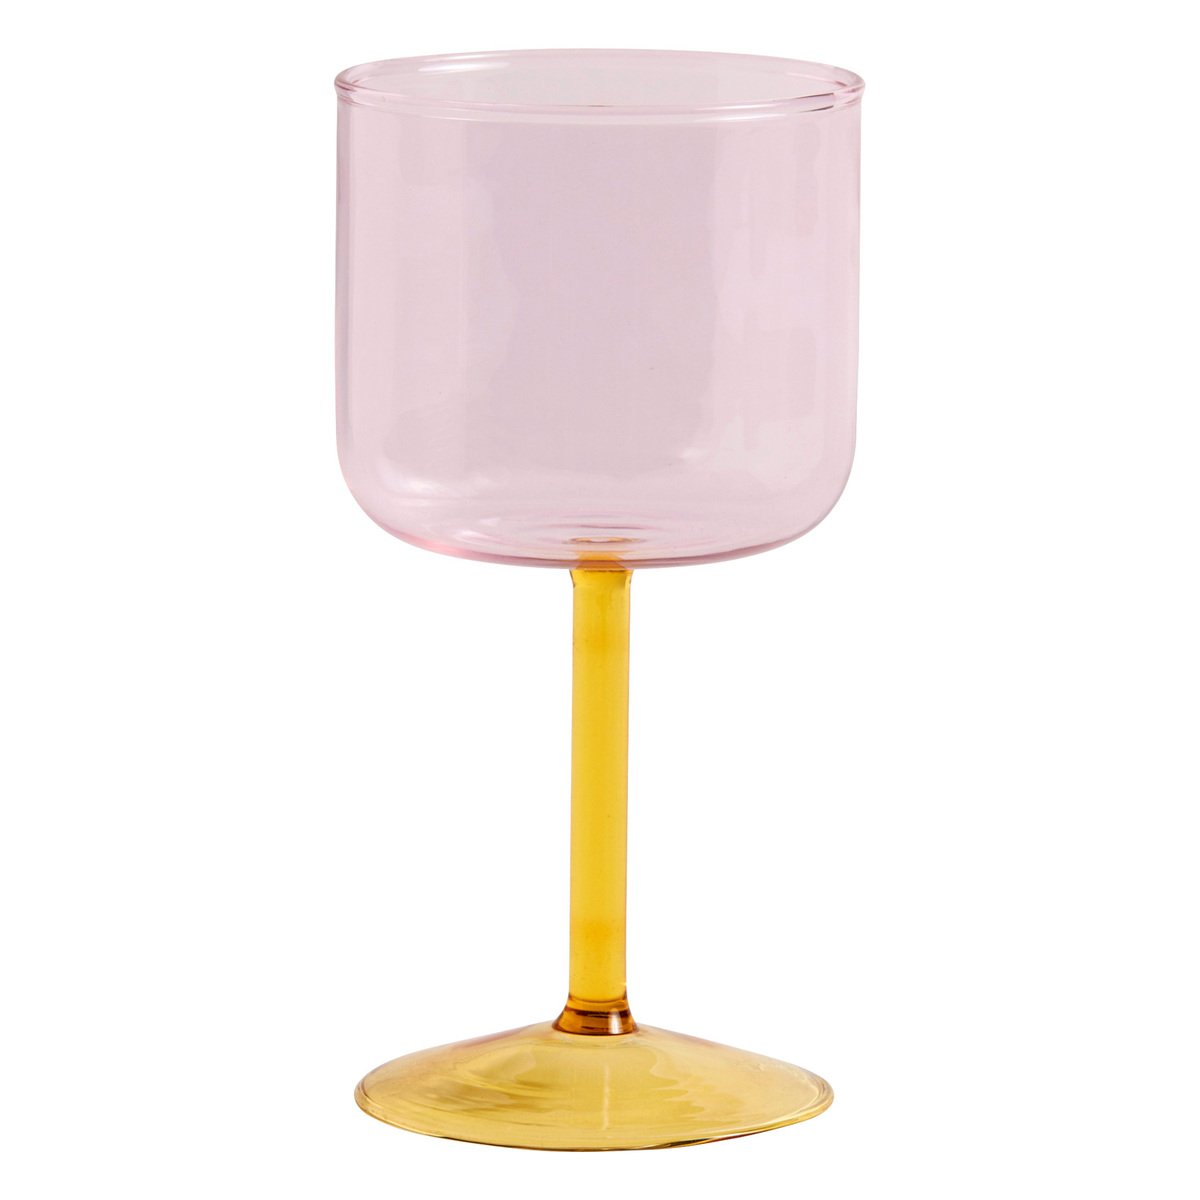 https://media.fds.fi/product_image/HA541224_Tint-Wineglass-Set-of-2-pink-and-yellow_EE.jpg